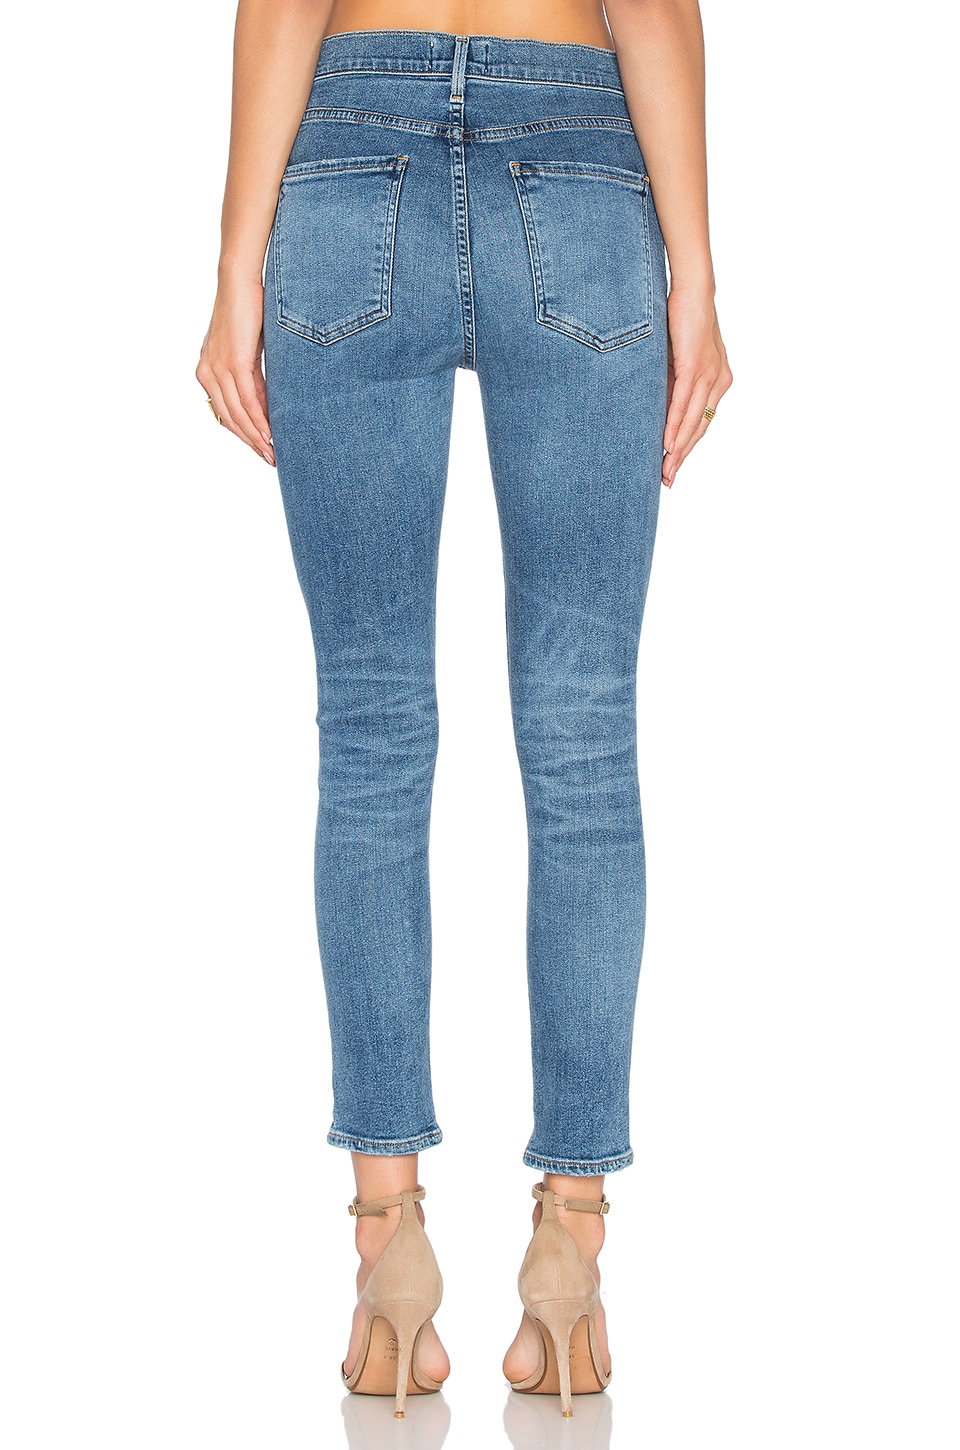 AGOLDE Sophie High Waist Crop Skinny Jeans in Adore | ModeSens